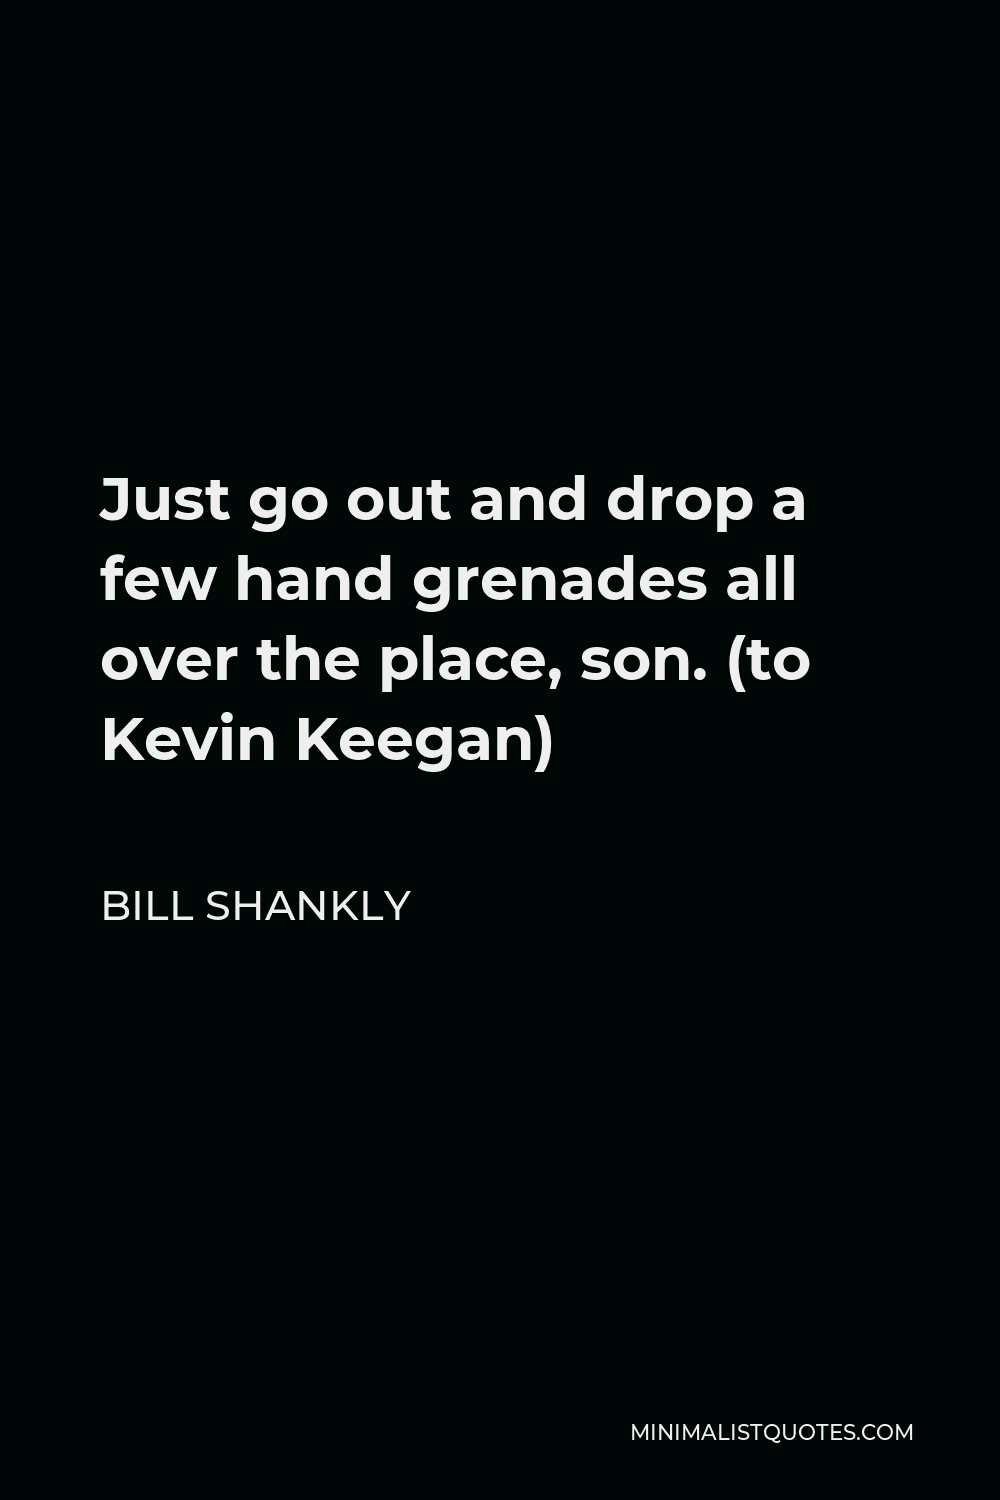 Bill Shankly Quote - Just go out and drop a few hand grenades all over the place, son. (to Kevin Keegan)